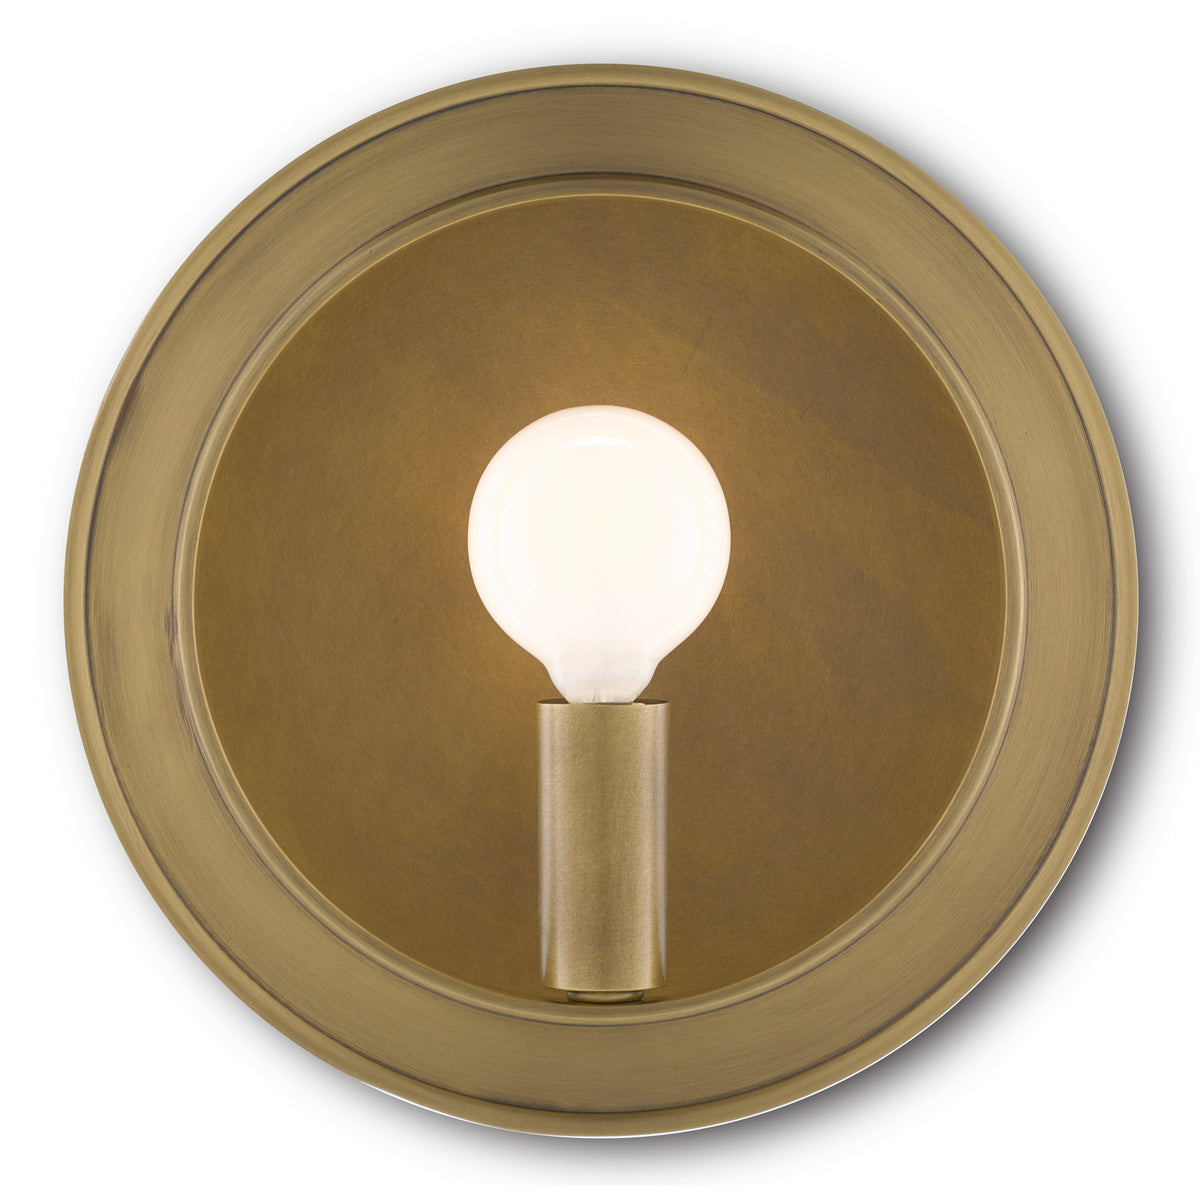 Chaplet Brass Wall Sconce